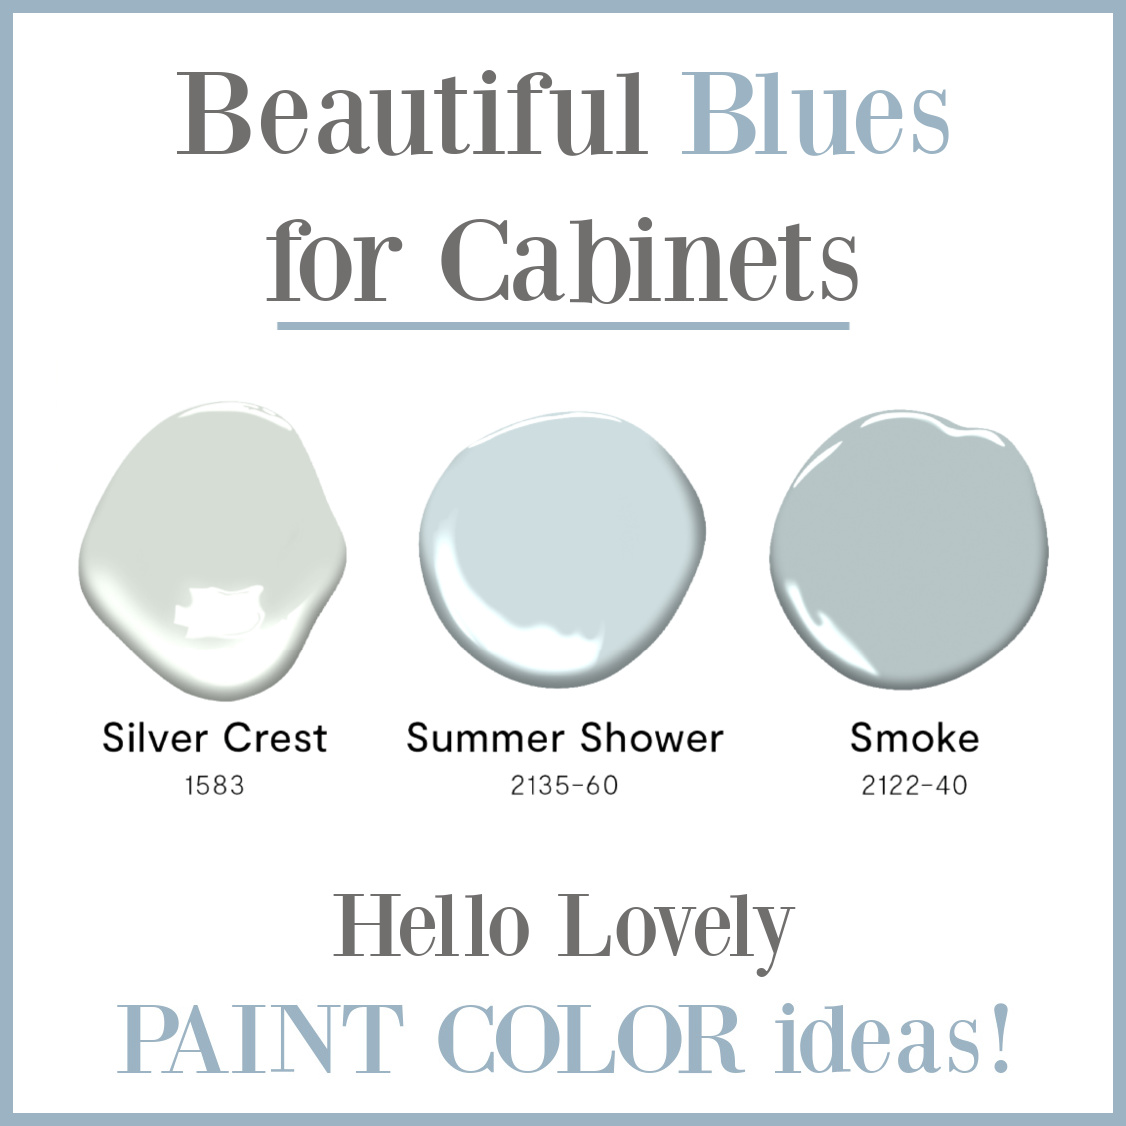 Beautiful Blue Paint Colors for Cabinets - visit Hello Lovely Studio for more details! #bluepaintcolors #benjaminmooreblues #kitchencabinetcolors